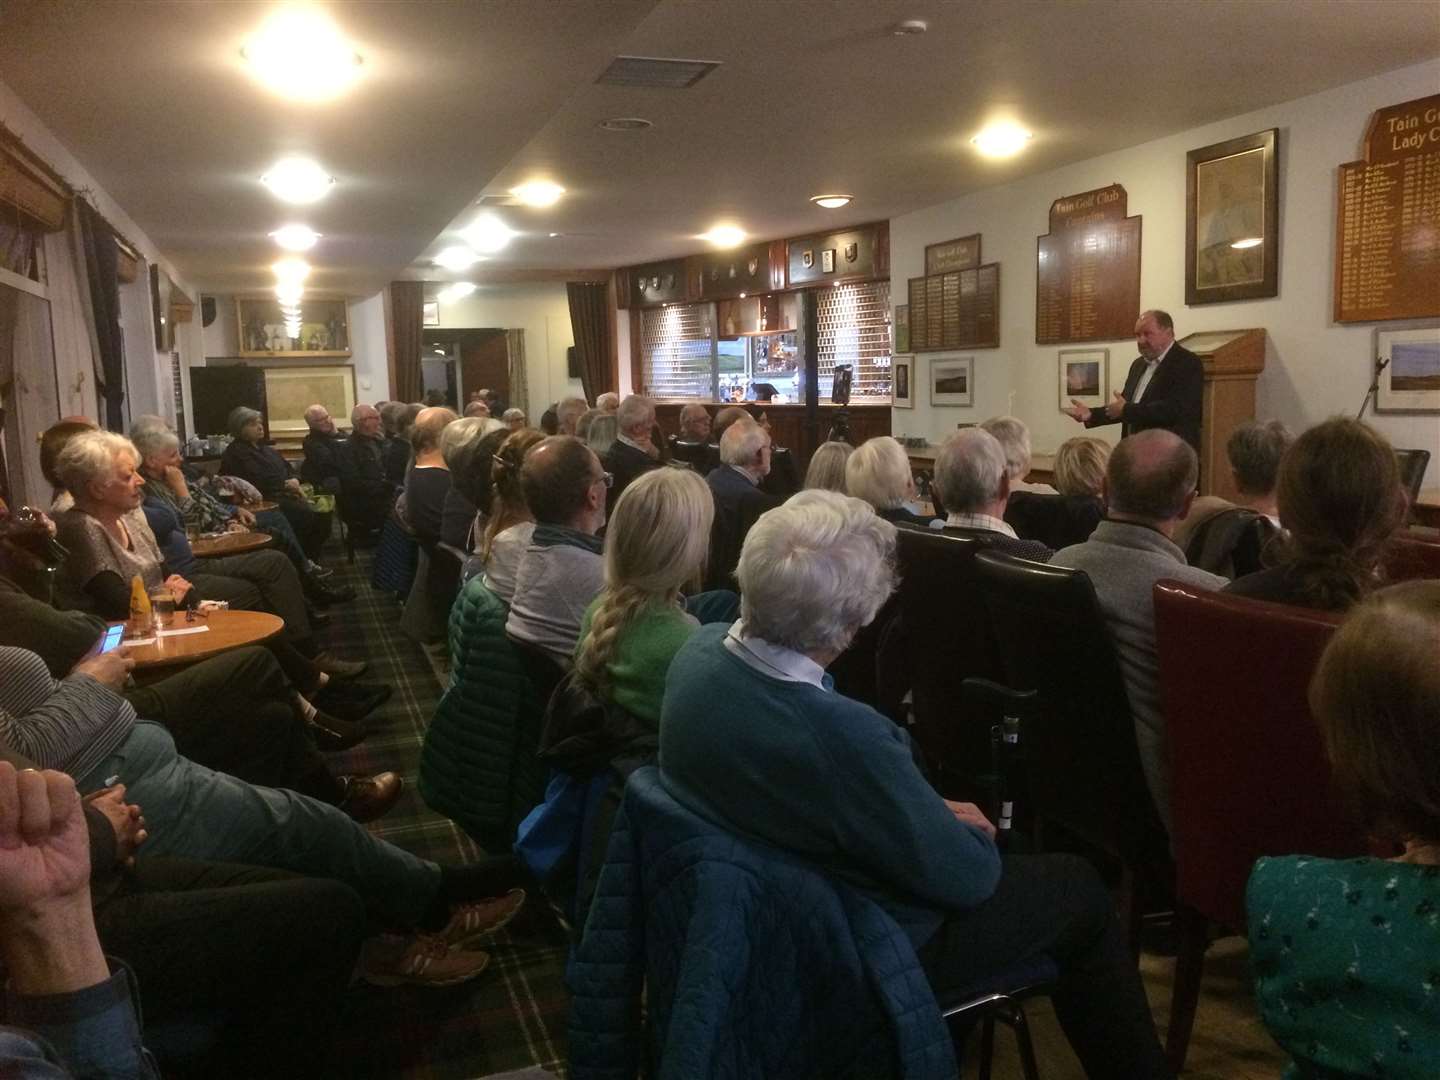 Broadcaster and writer James Naughtie 'enthralled' a capacity audience at his talk in Tain Golf Club.